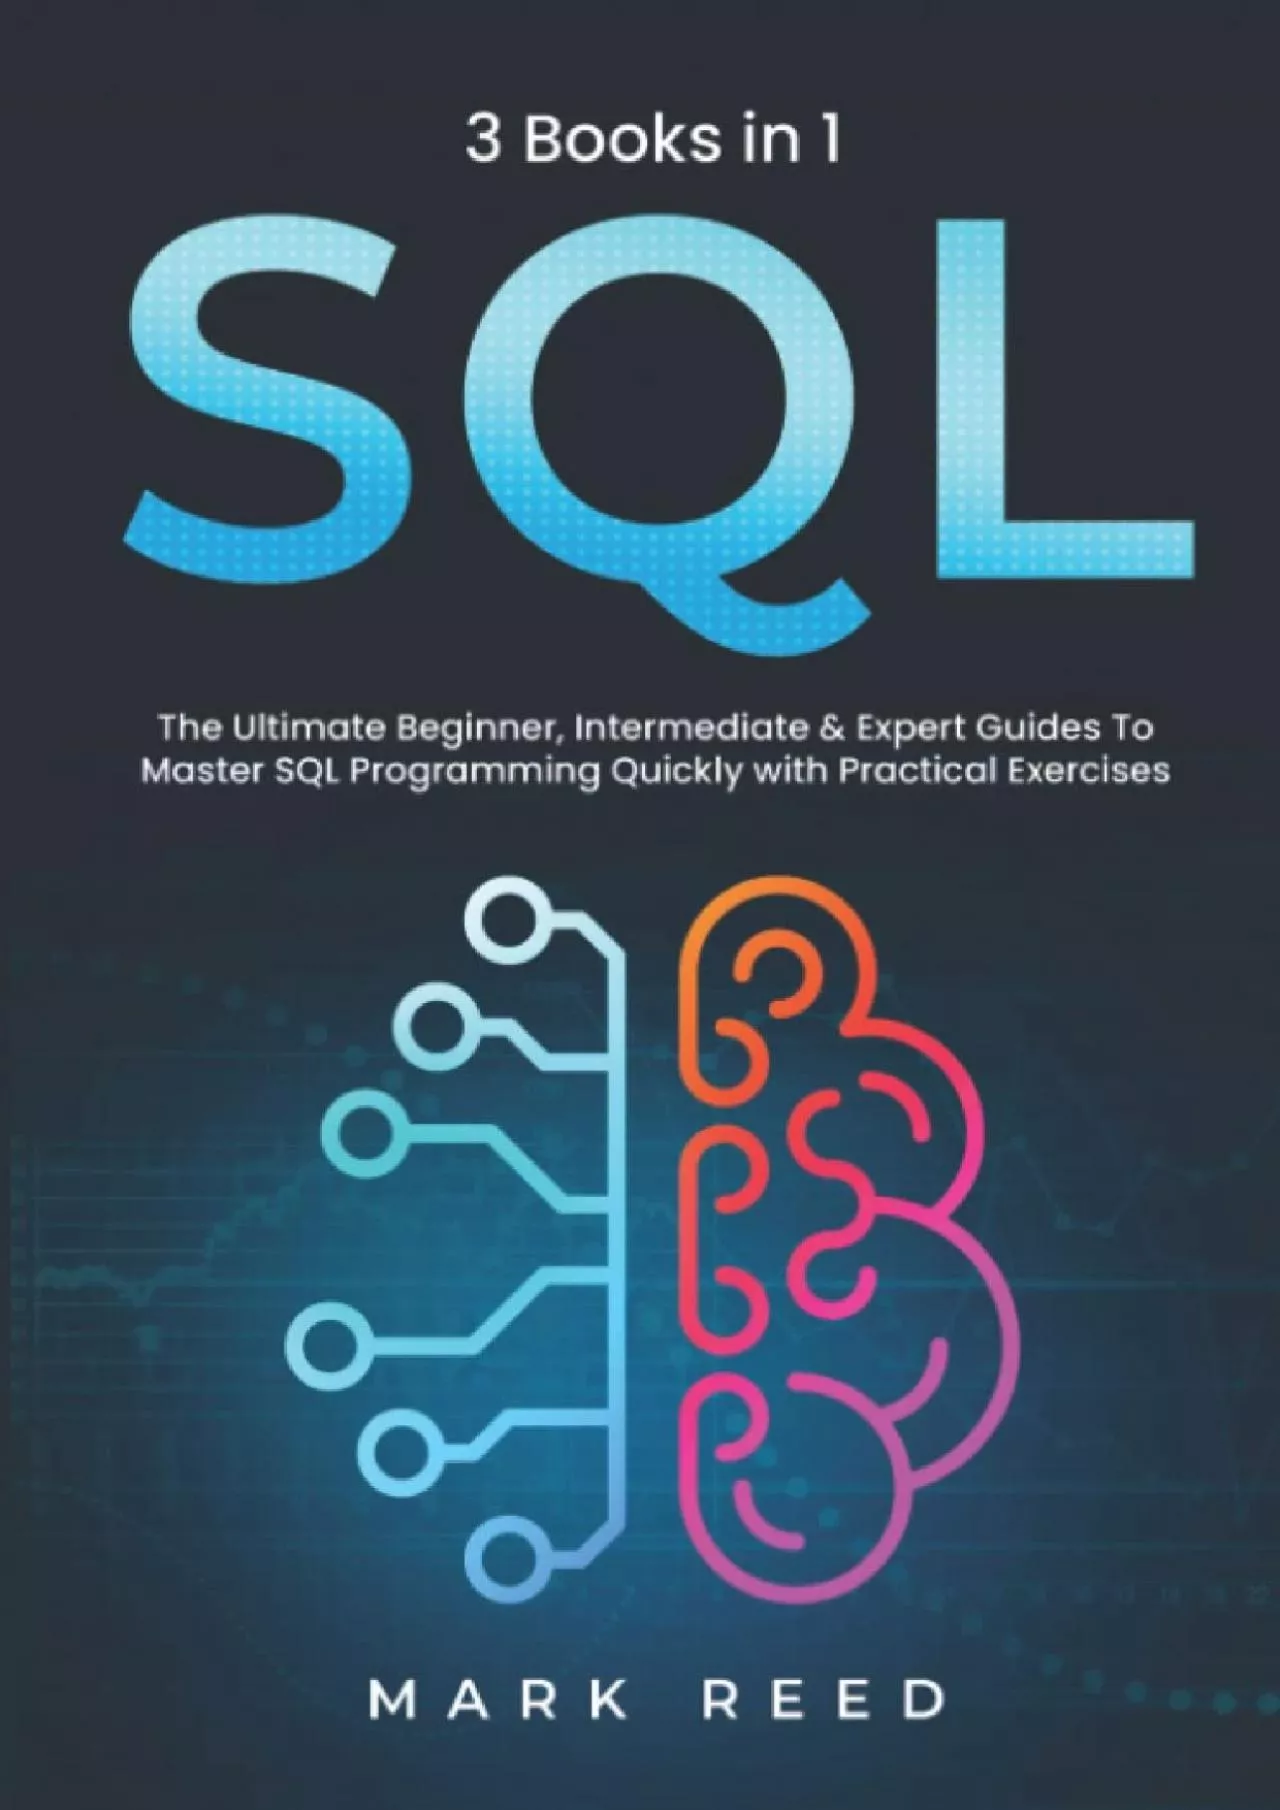 (DOWNLOAD)-SQL QuickStart Guide: The Simplified Beginner\'s Guide to Managing, Analyzing,